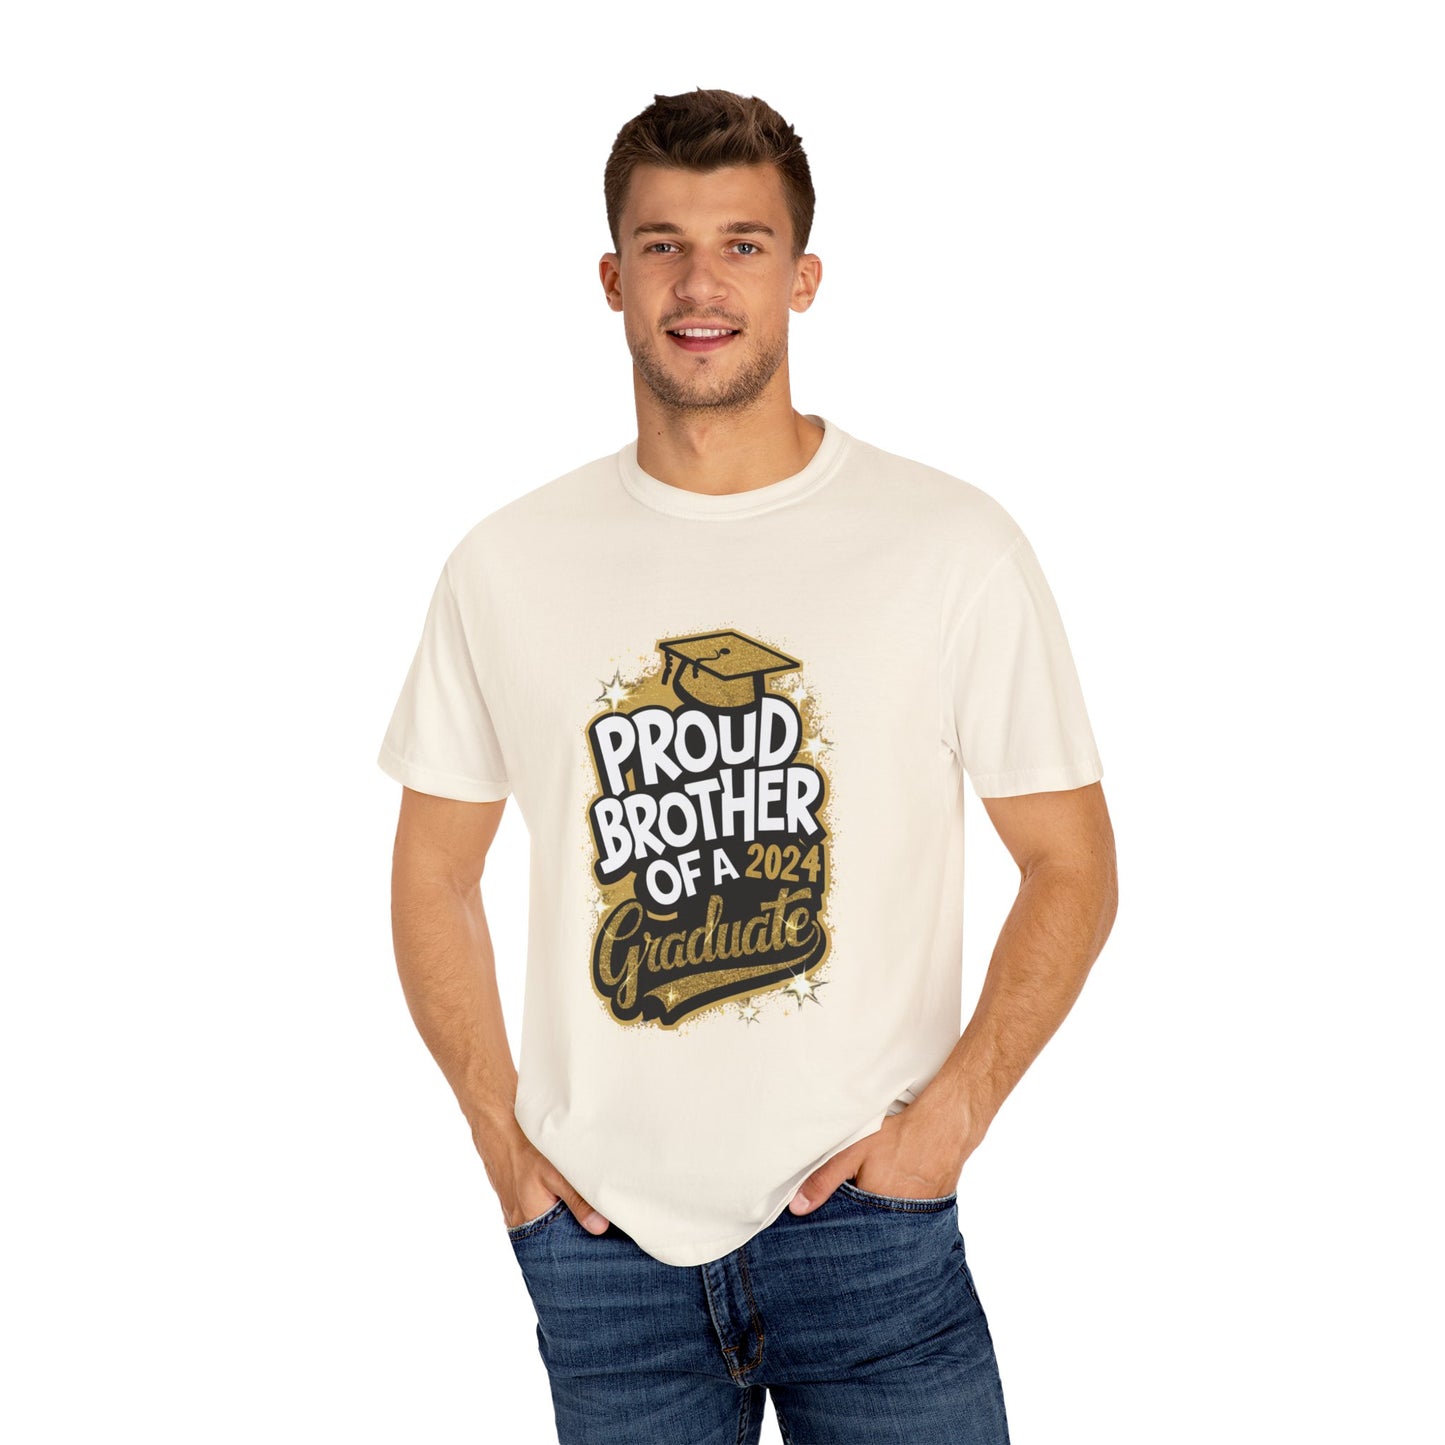 Proud Brother of a 2024 Graduate Unisex Garment-dyed T-shirt Cotton Funny Humorous Graphic Soft Premium Unisex Men Women Ivory T-shirt Birthday Gift-45